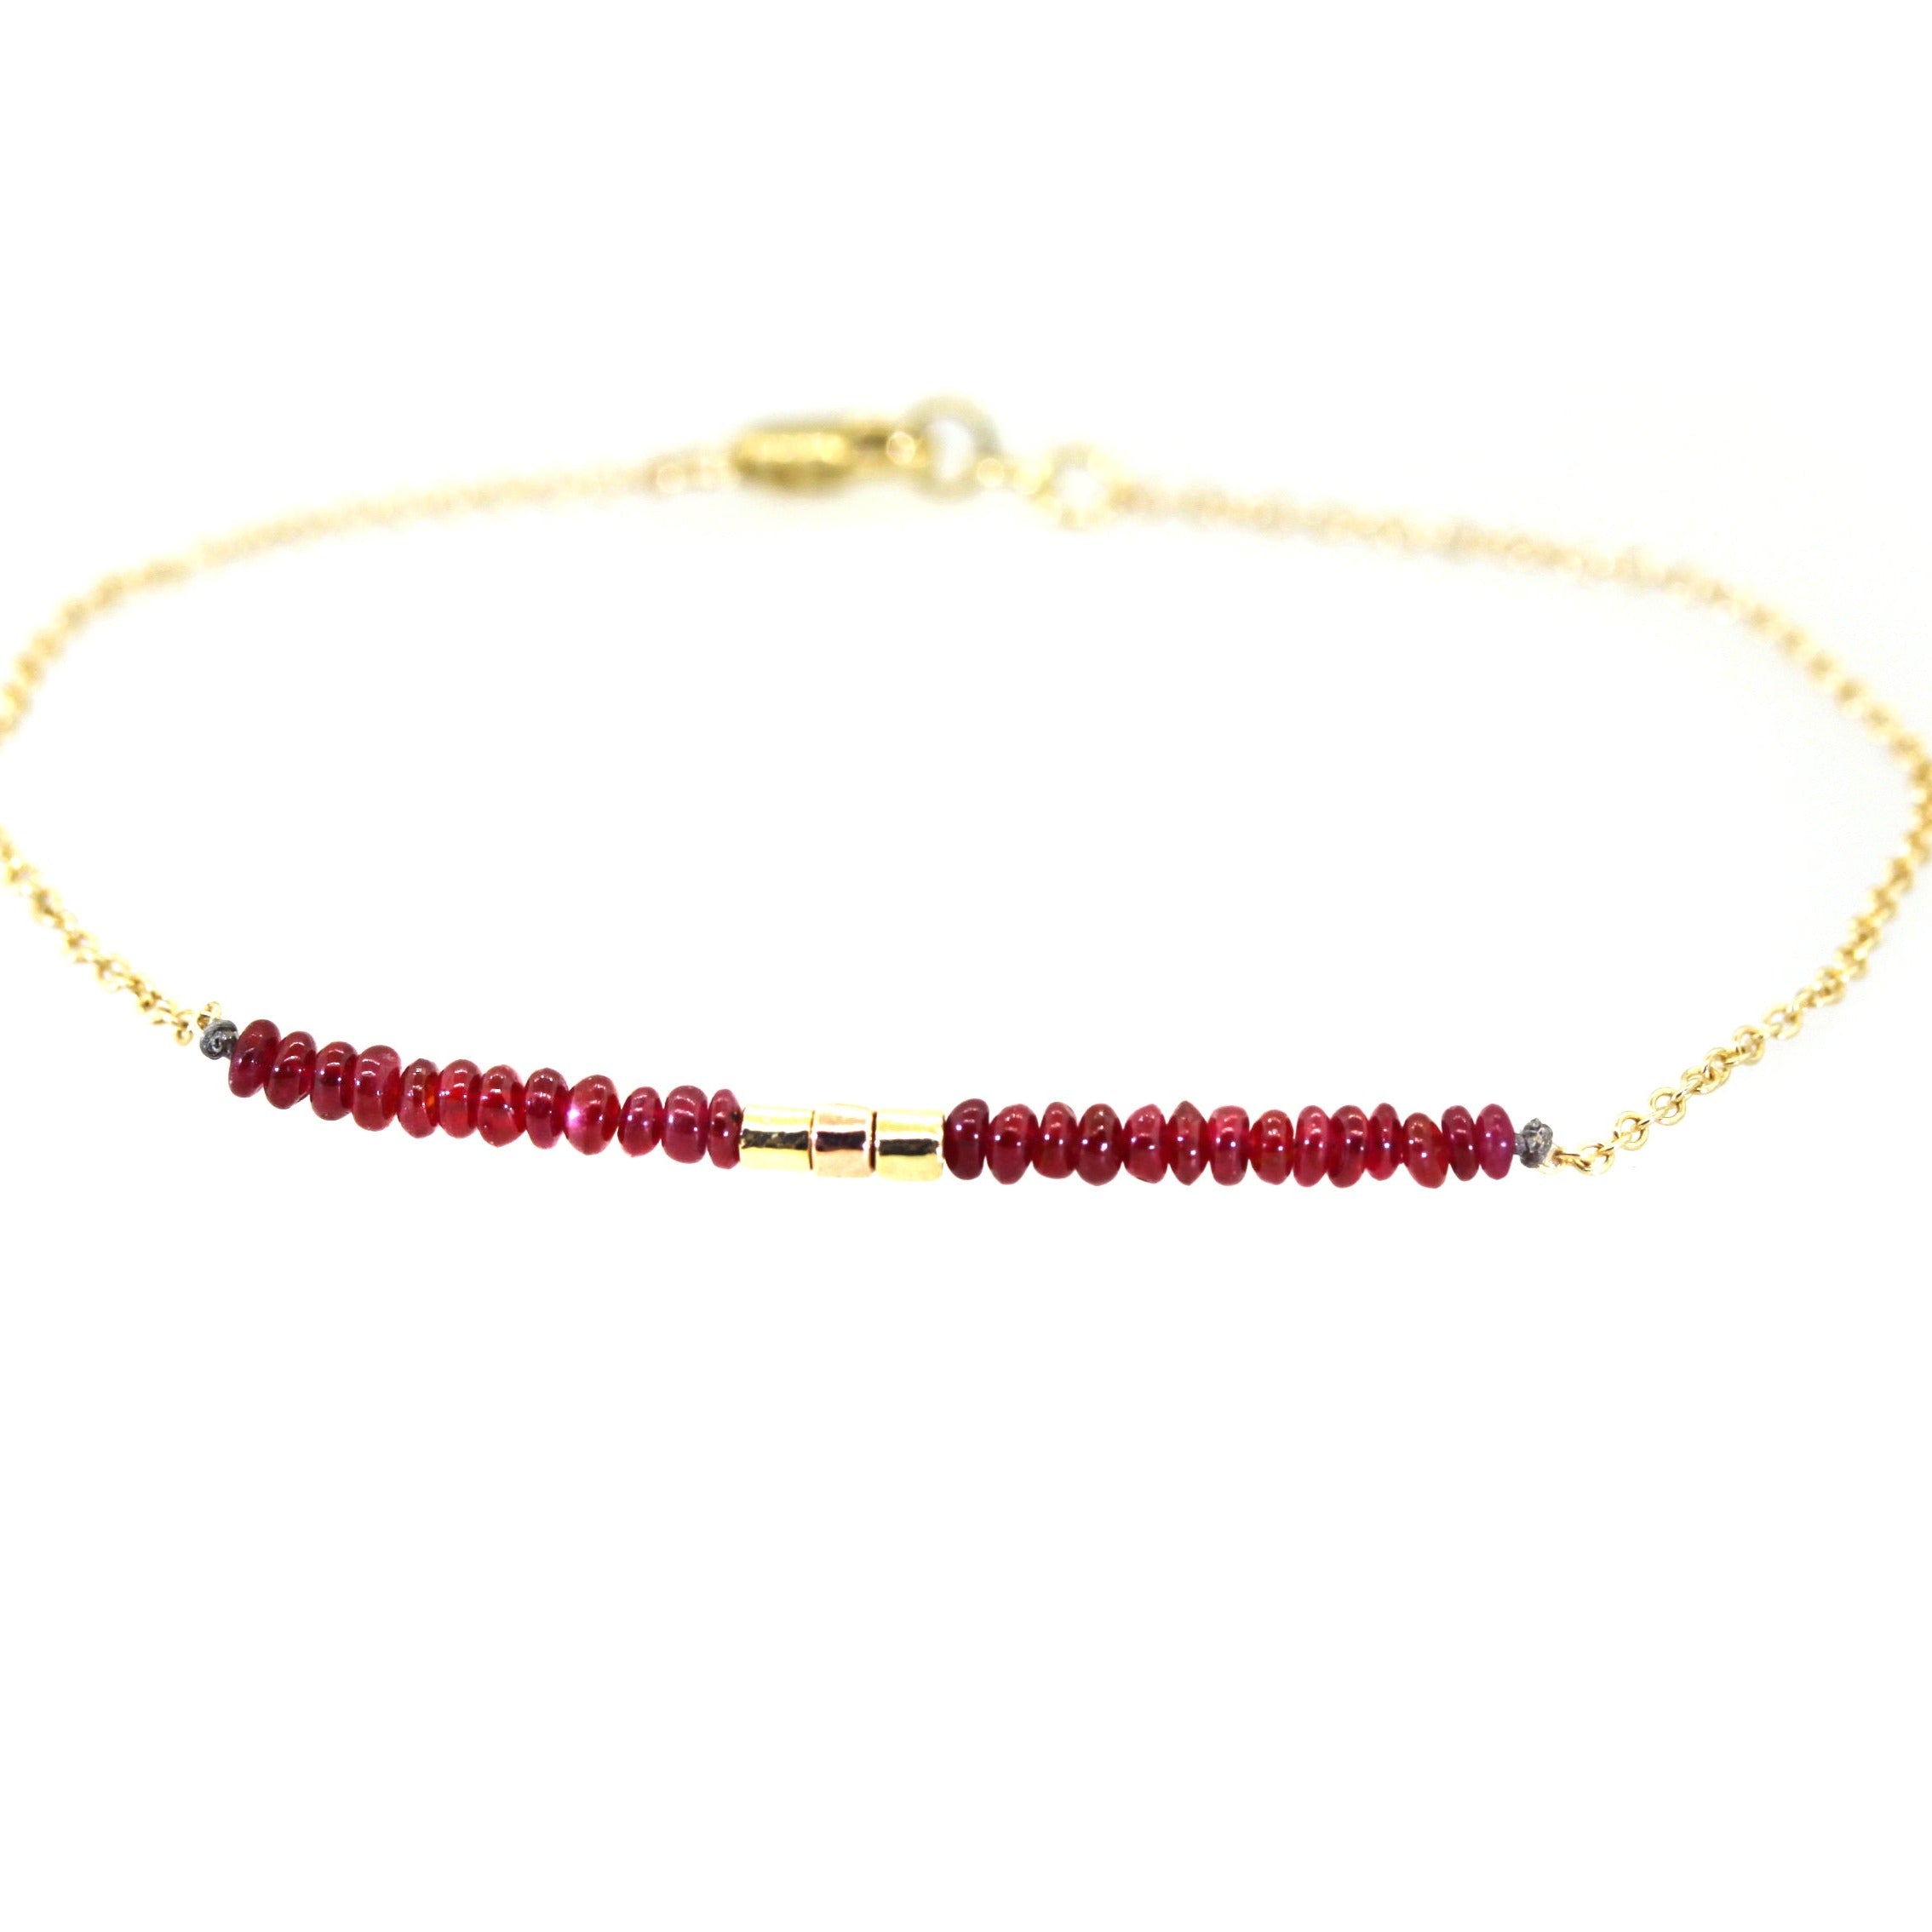 Ruby Bracelet with Three Gold Rings in Center